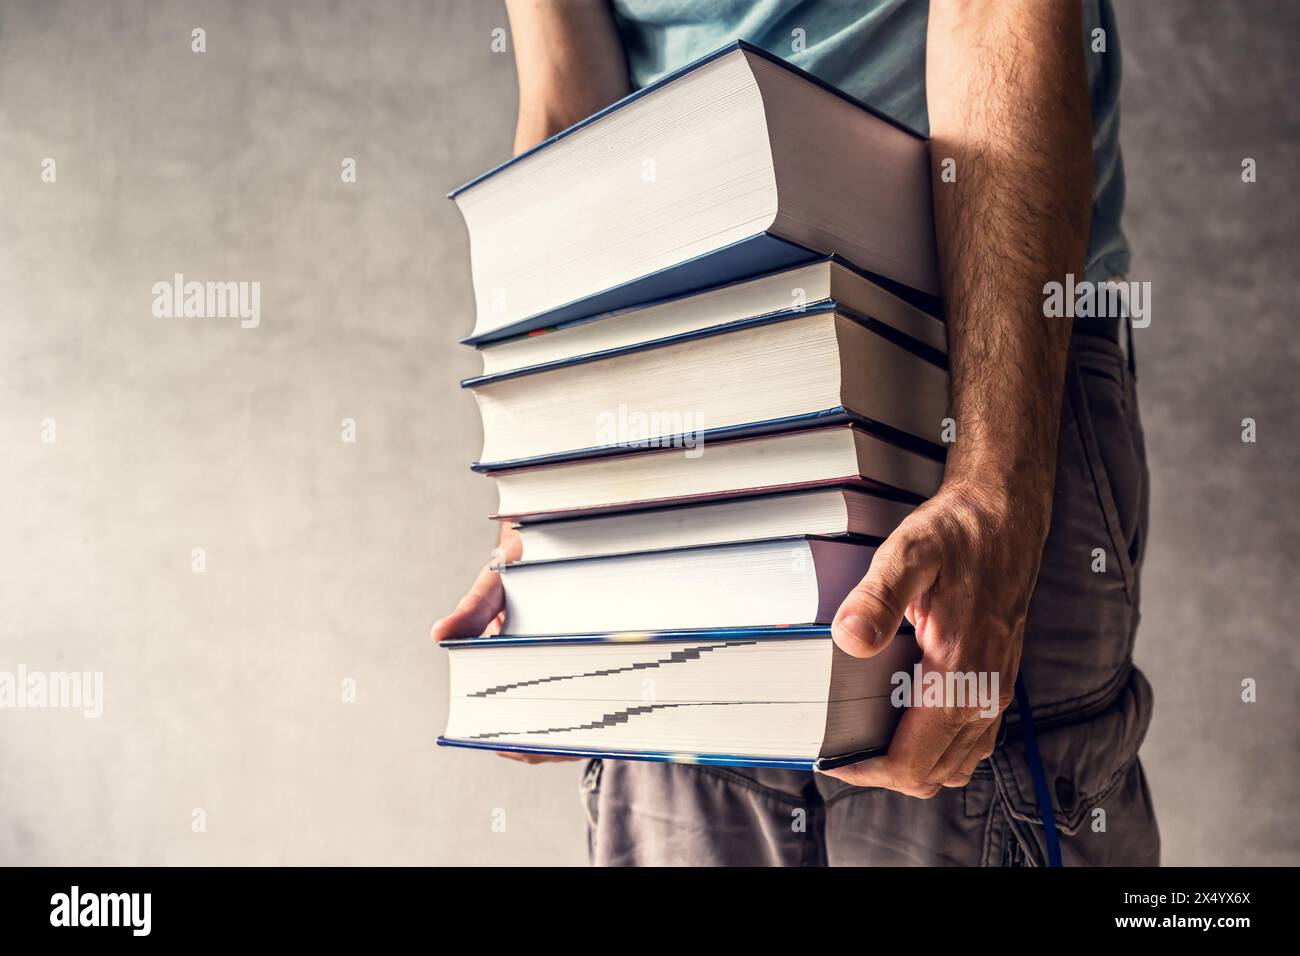 Man carrying heavy books, requiring him to put all his strength into lifting the literature, selective focus Stock Photo